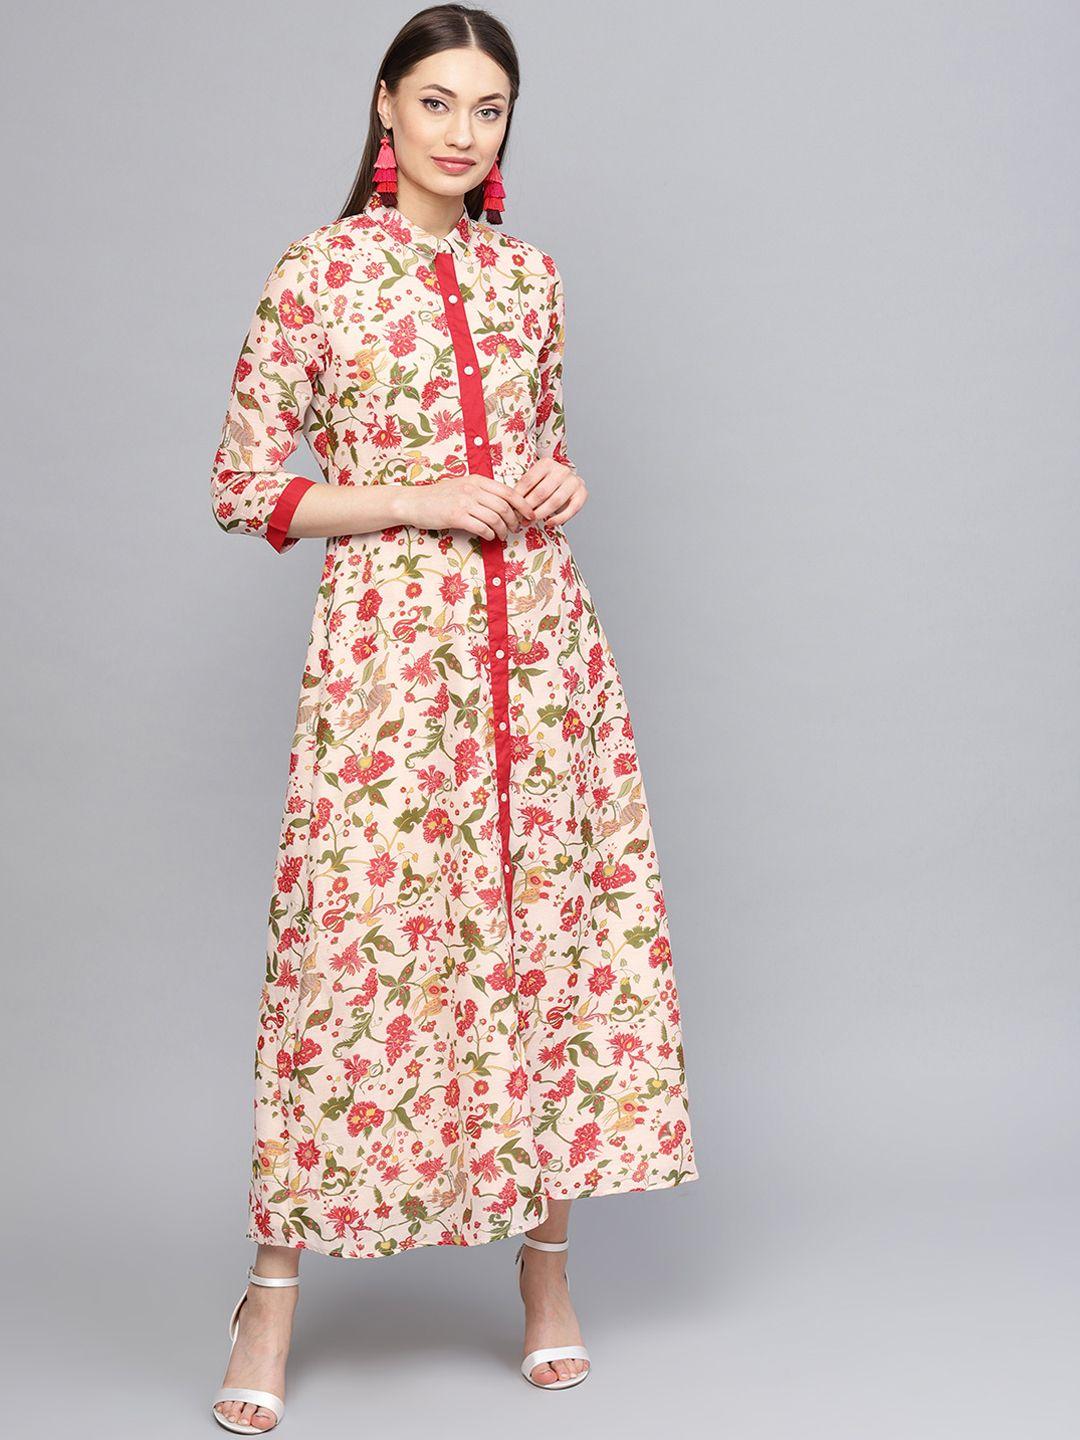 rare-women-beige-&-red-floral-printed-ethnic-shirt-dress